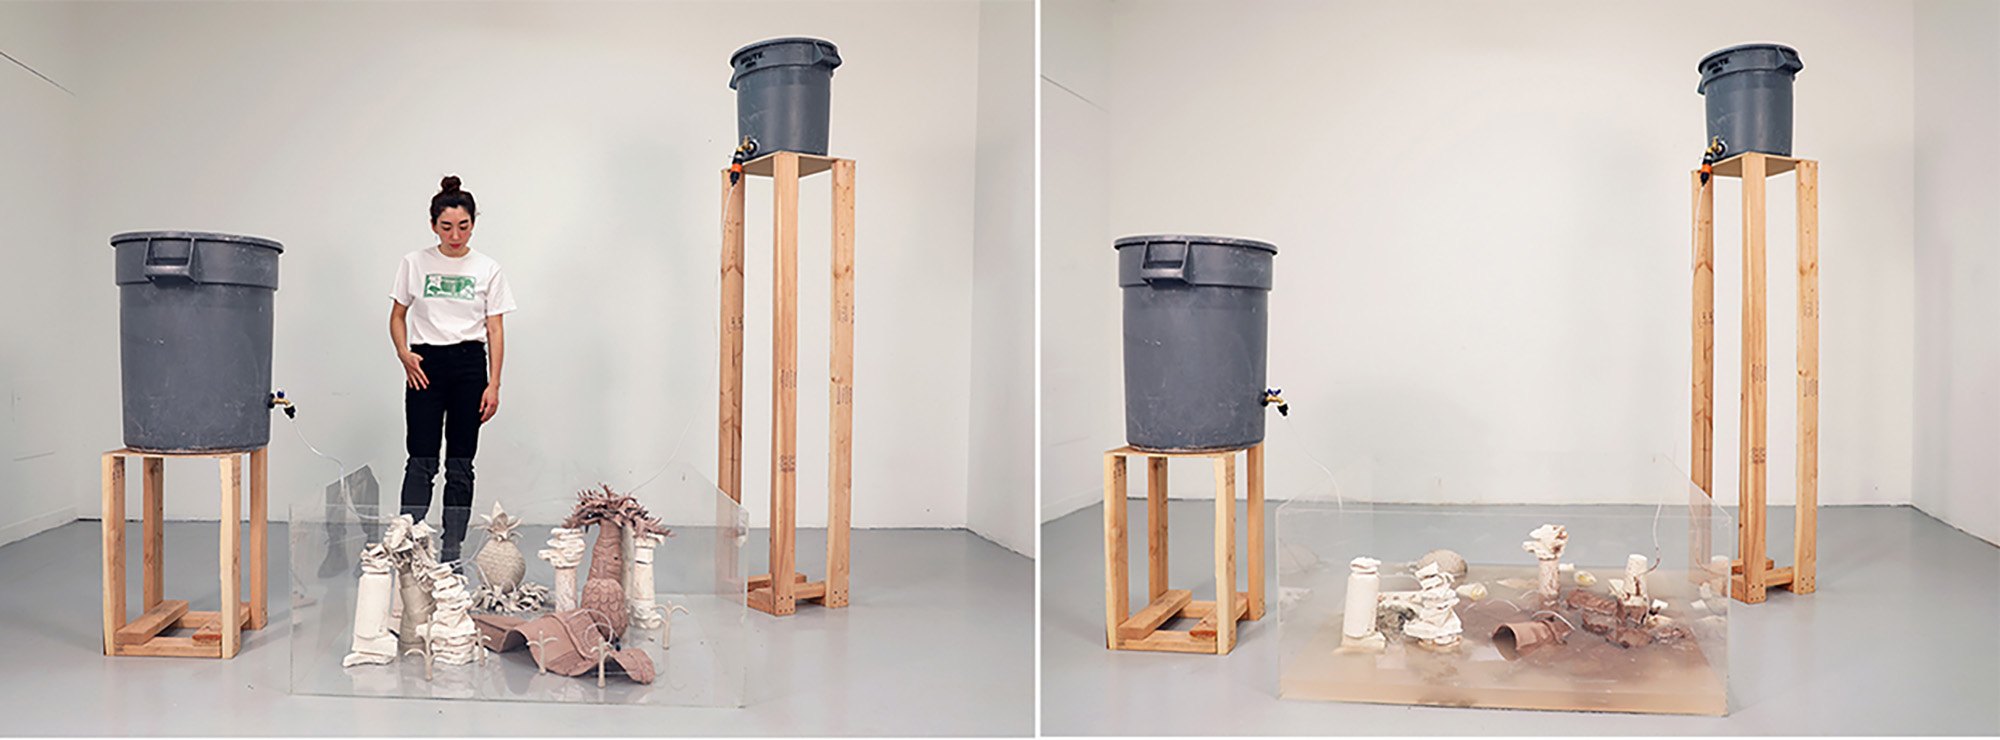 Two images of a gallery installation containing a plexiglass container with ceramic objects inside, being filled with liquid from two garbage cans